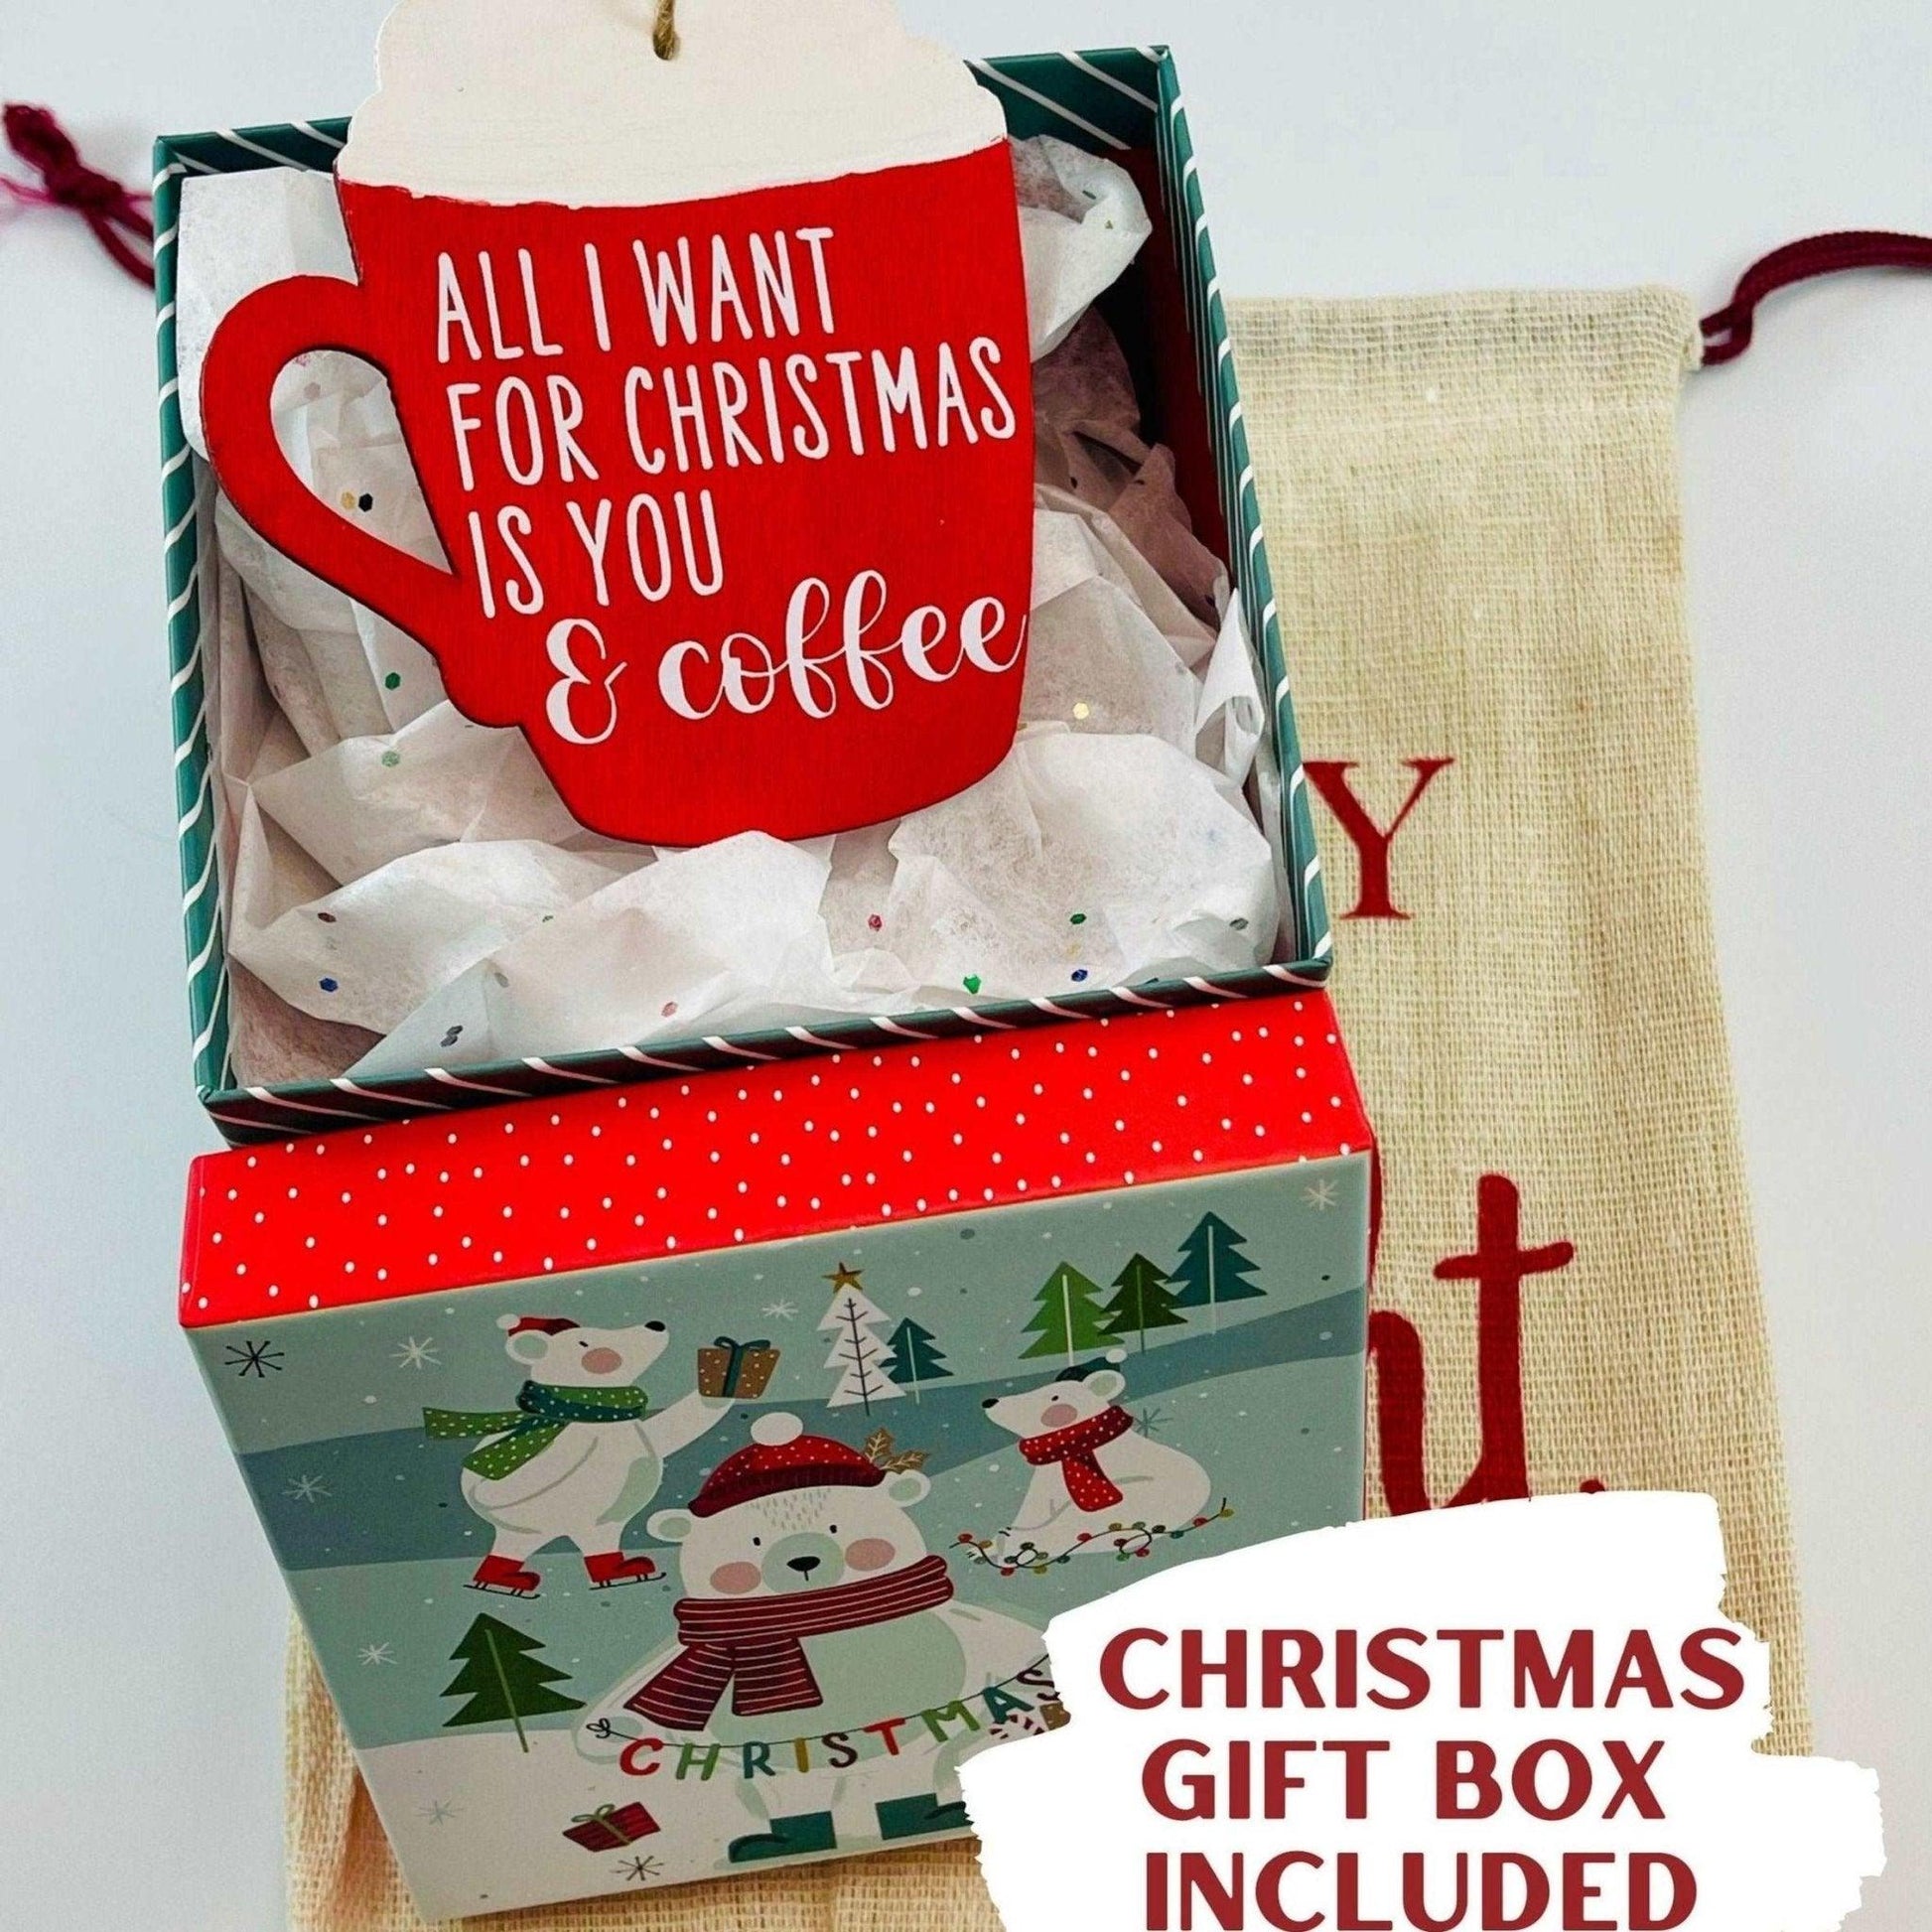 All I Want For Christmas Is You & Coffee Wooden Ornament - Sunshine Soul MD